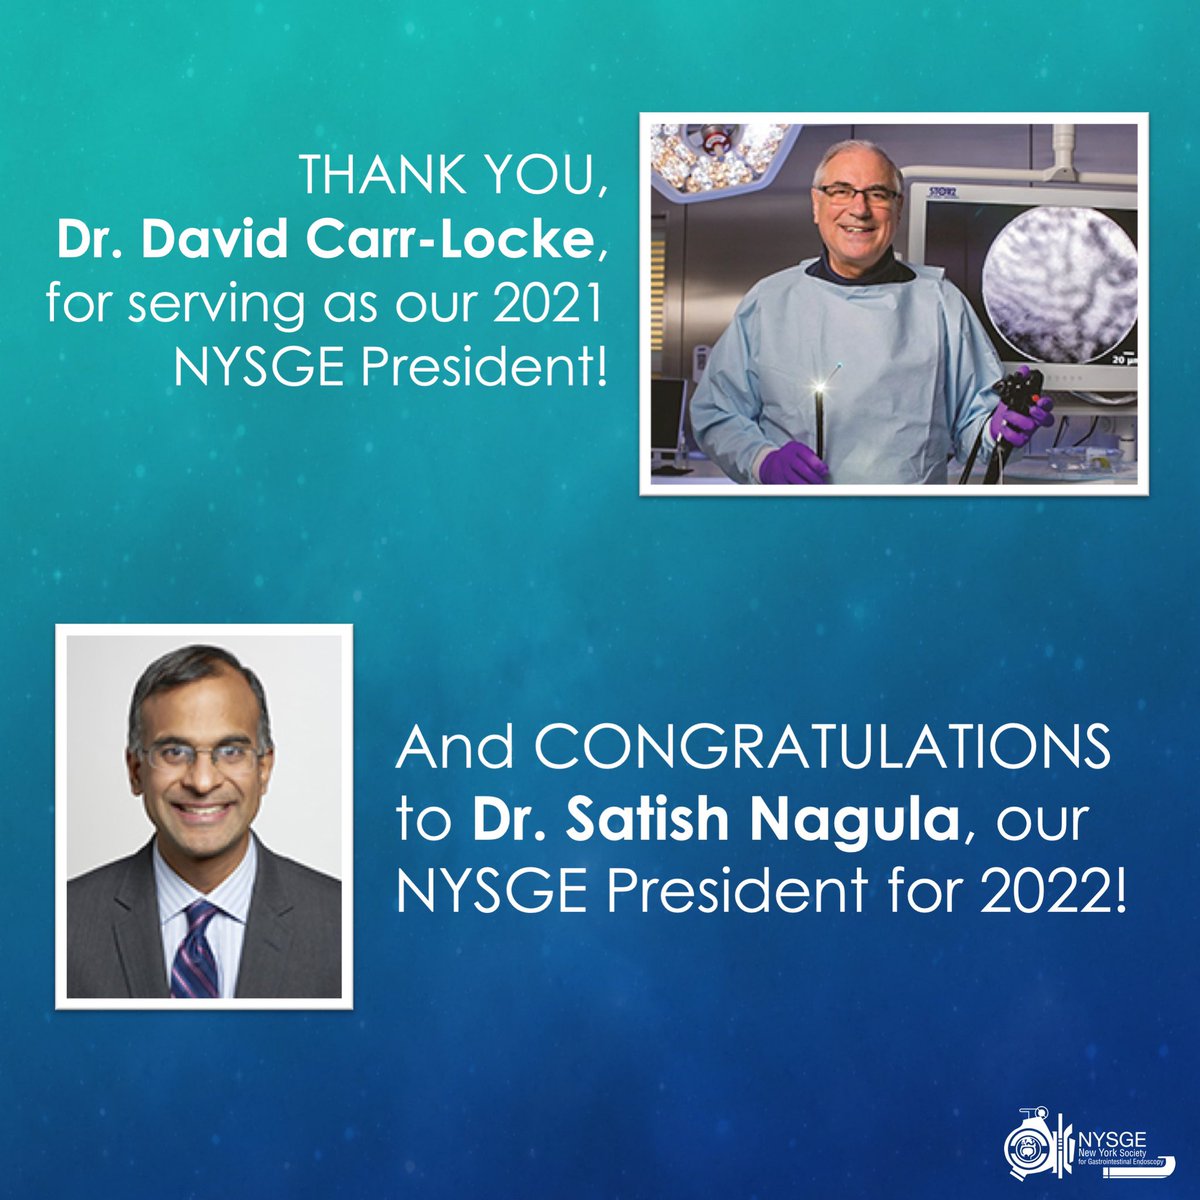 Congrats to Dr. Satish Nagula, our new #NYSGE President!